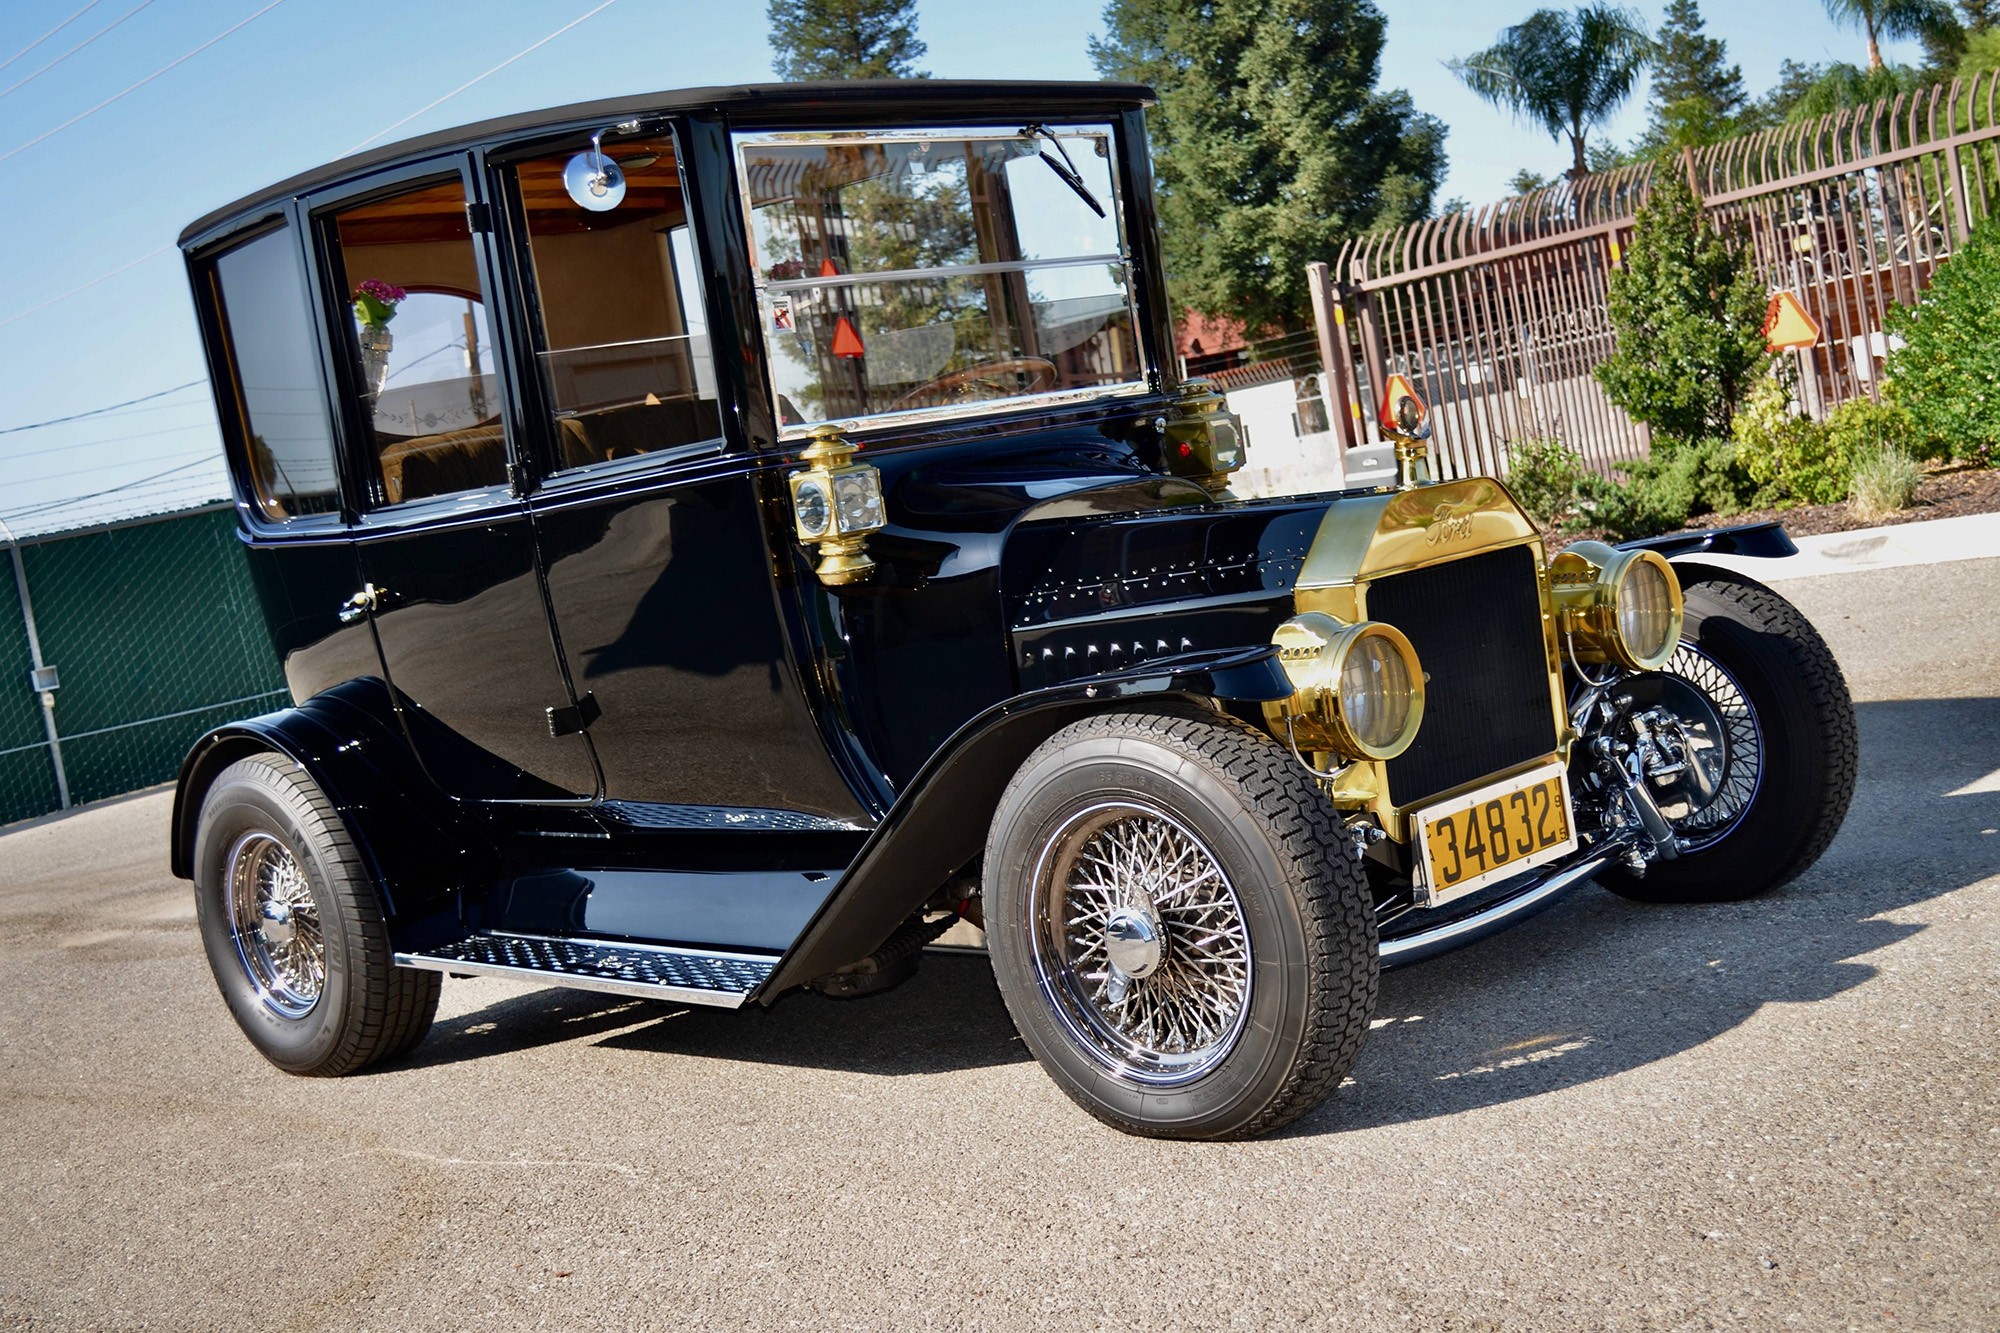 Not All Early Fords Hot Rods Are T-buckets: Check Out this 1915 Ford Model T Center-Door Sedan